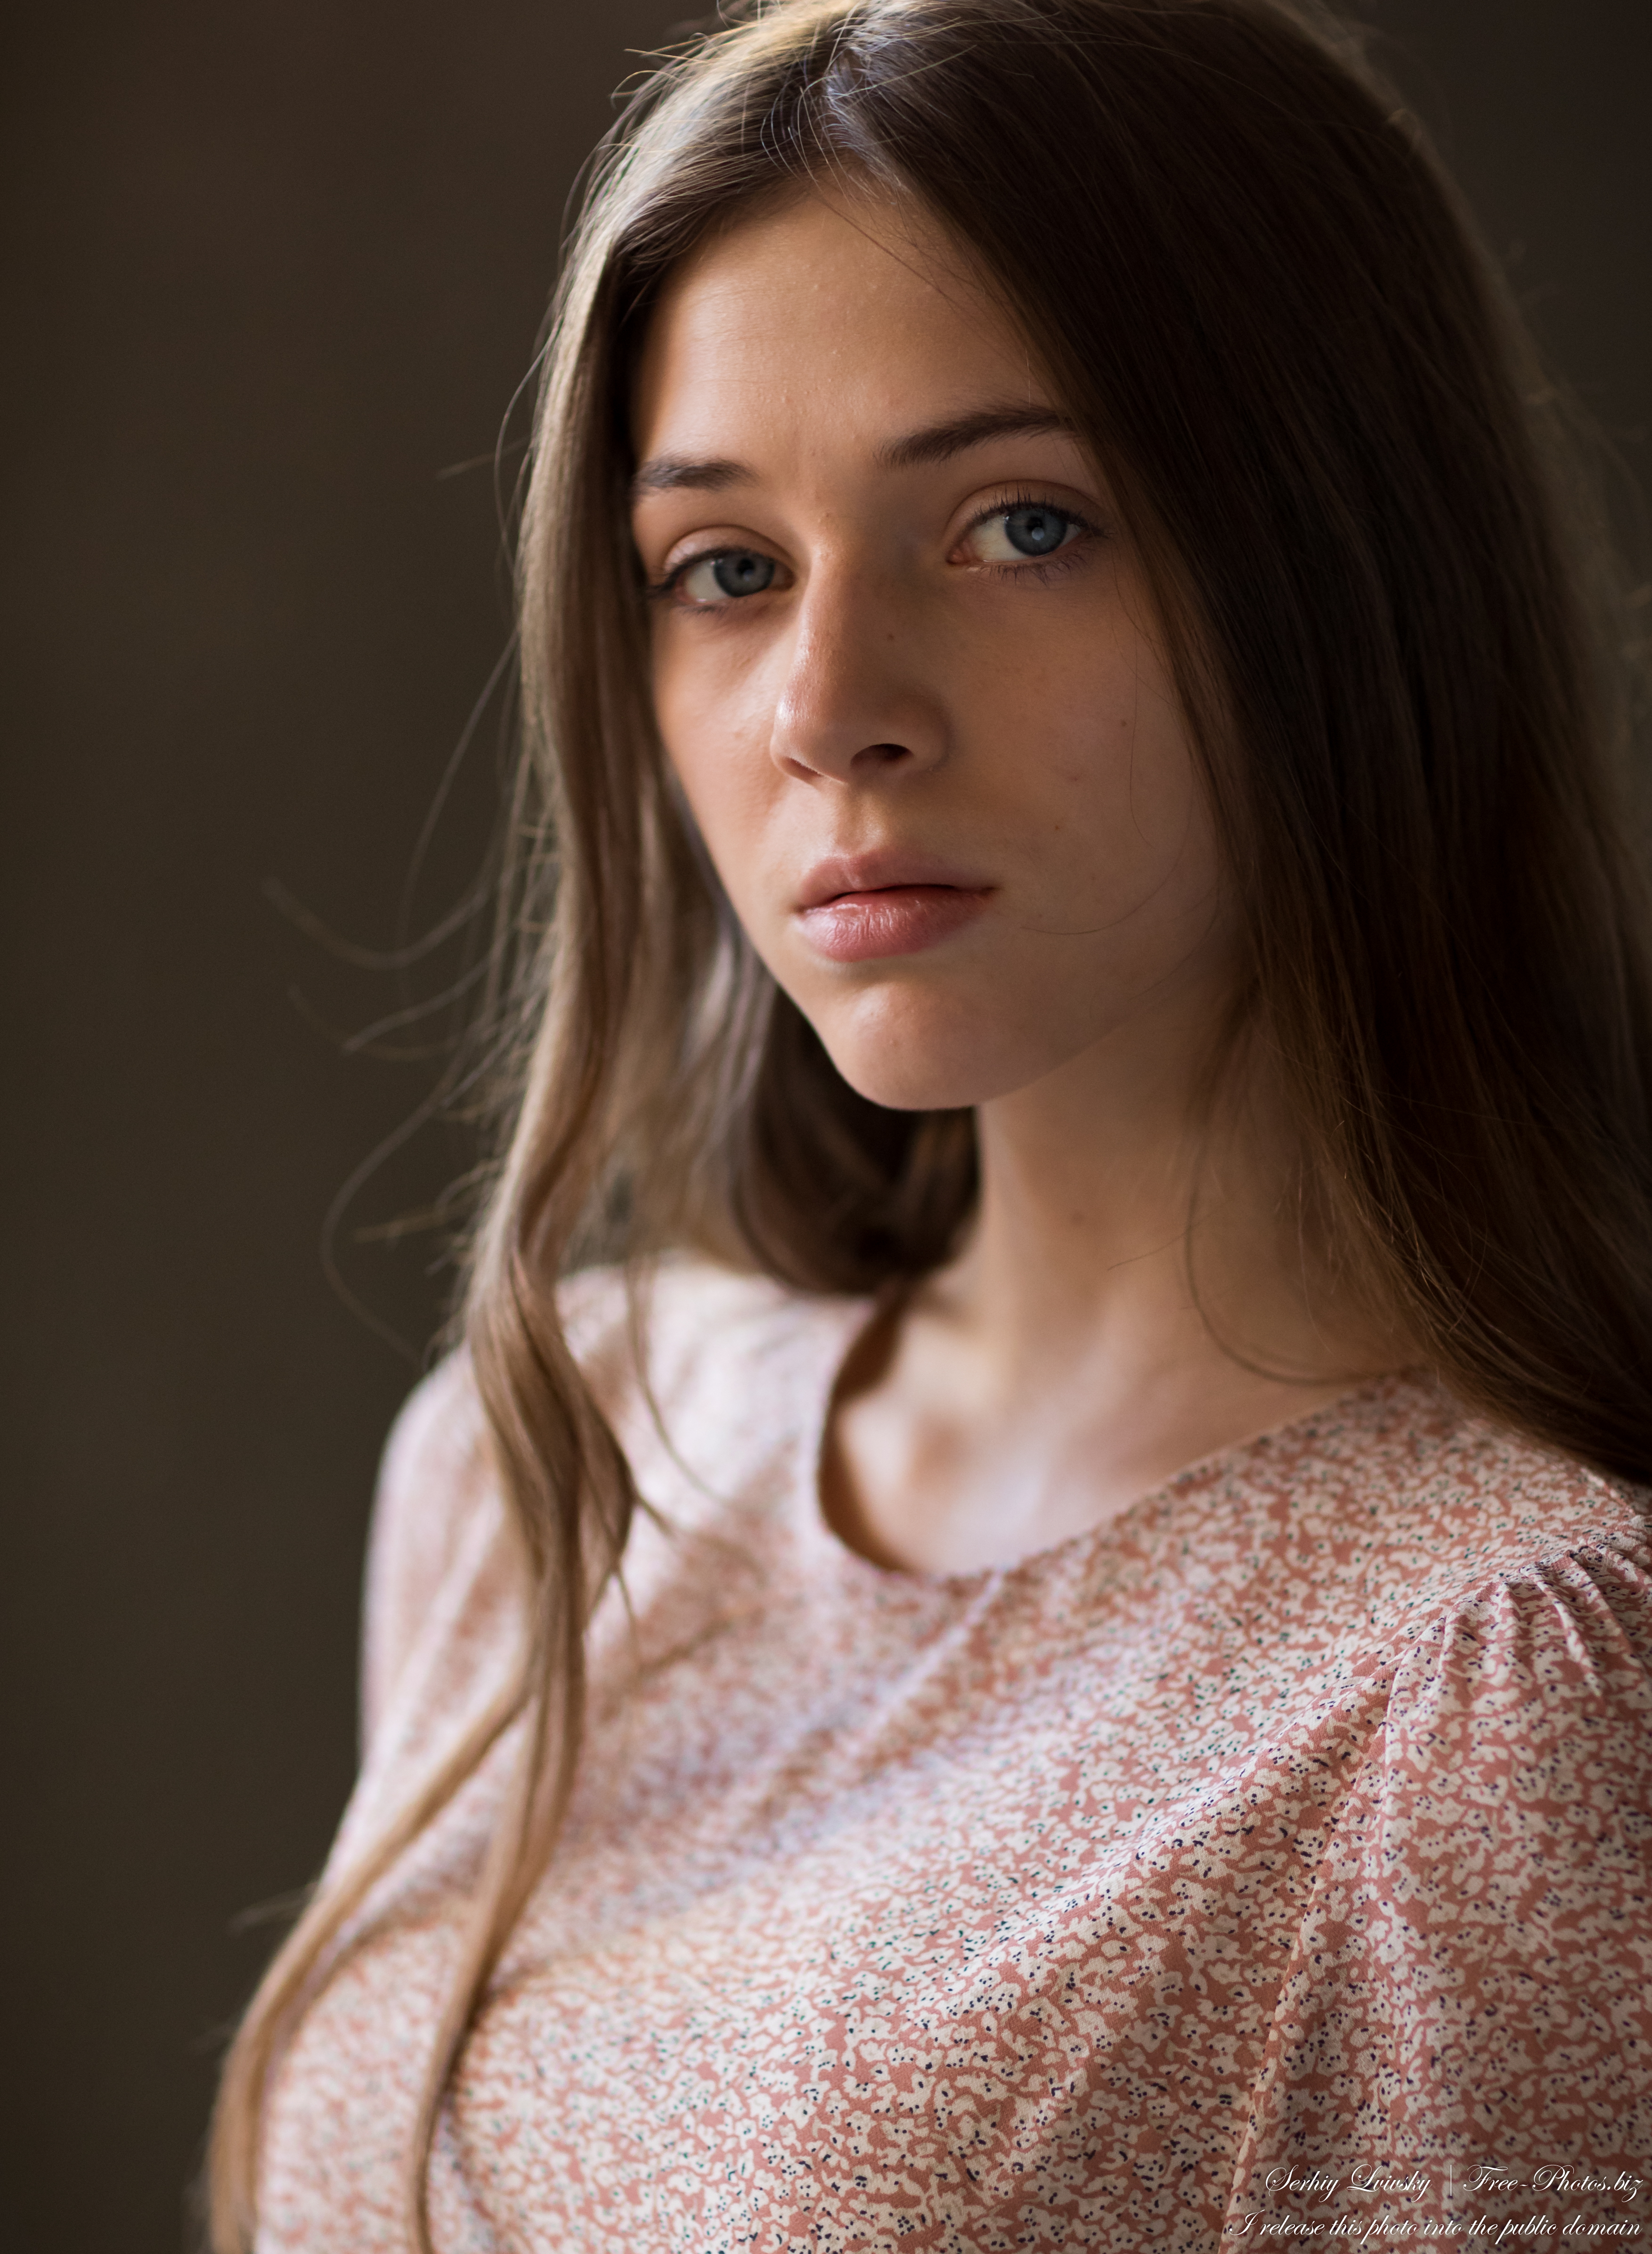 Sophia - a 17-year-old creation of God with blue eyes photographed in October 2021 by Serhiy Lvivsky, portrait 22 out of 27